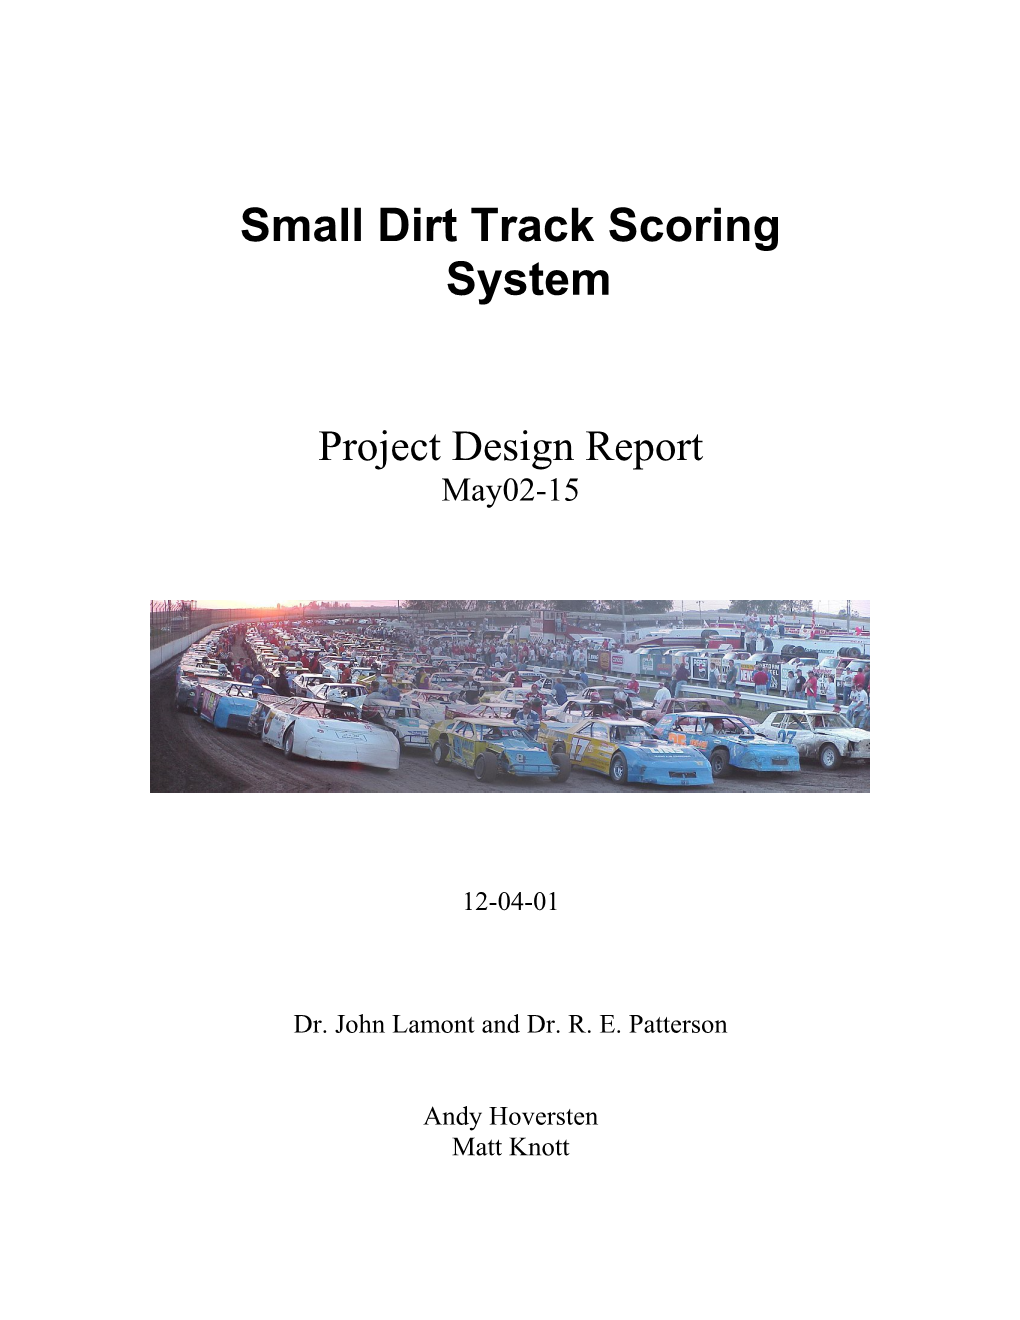 Small Dirt Track Scoring System